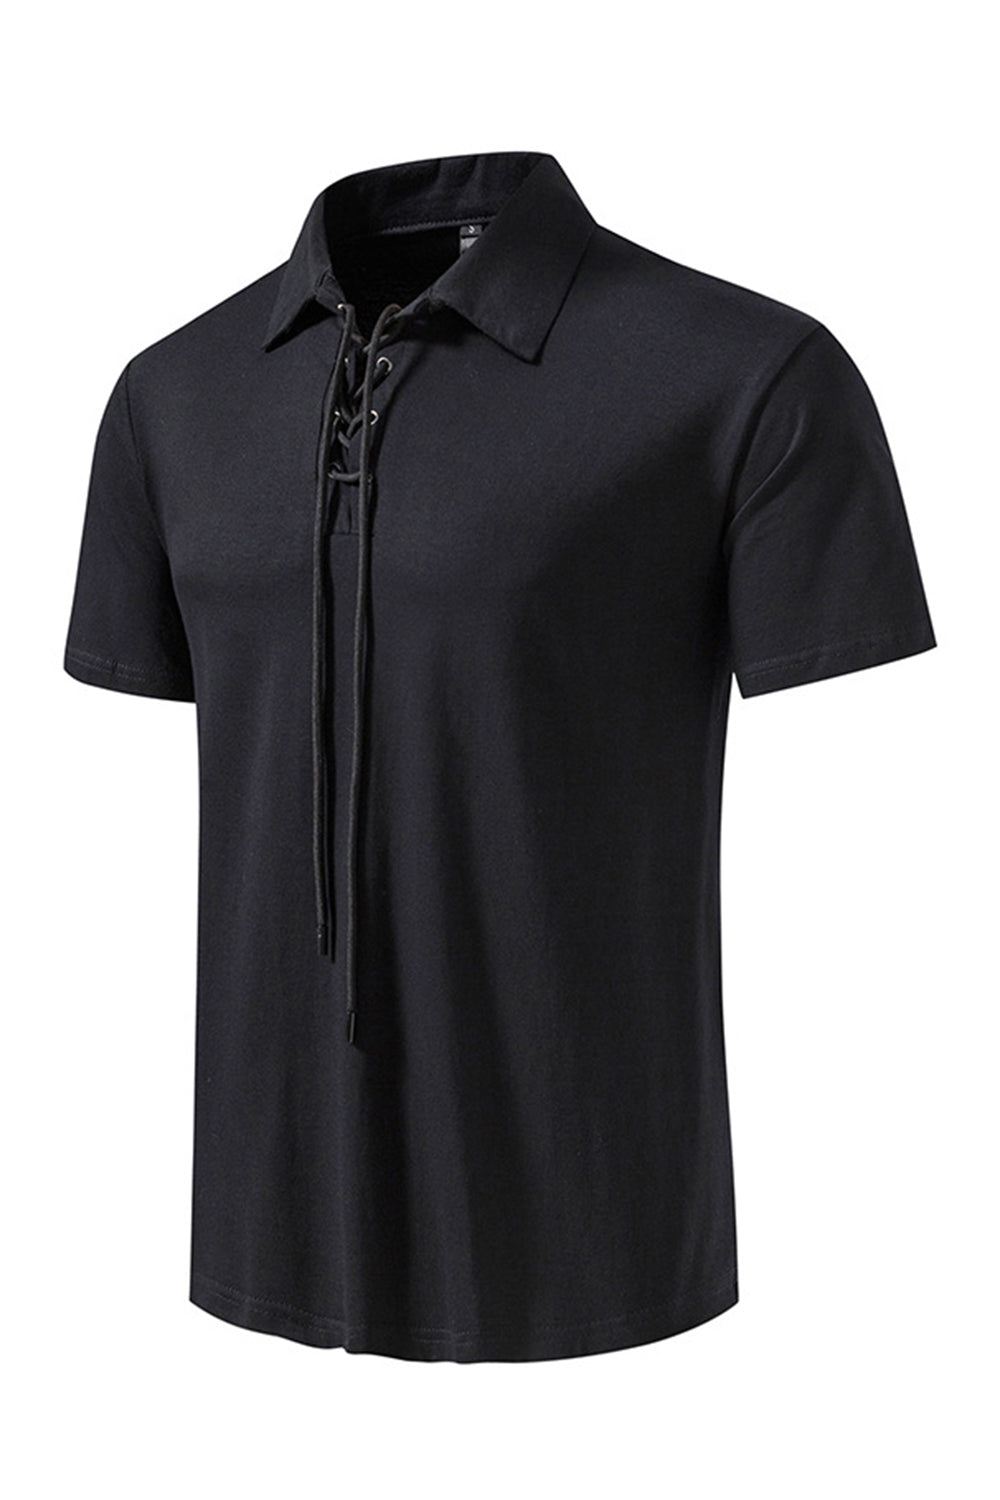 Summer Casual Black Men's Tops with Lace-up